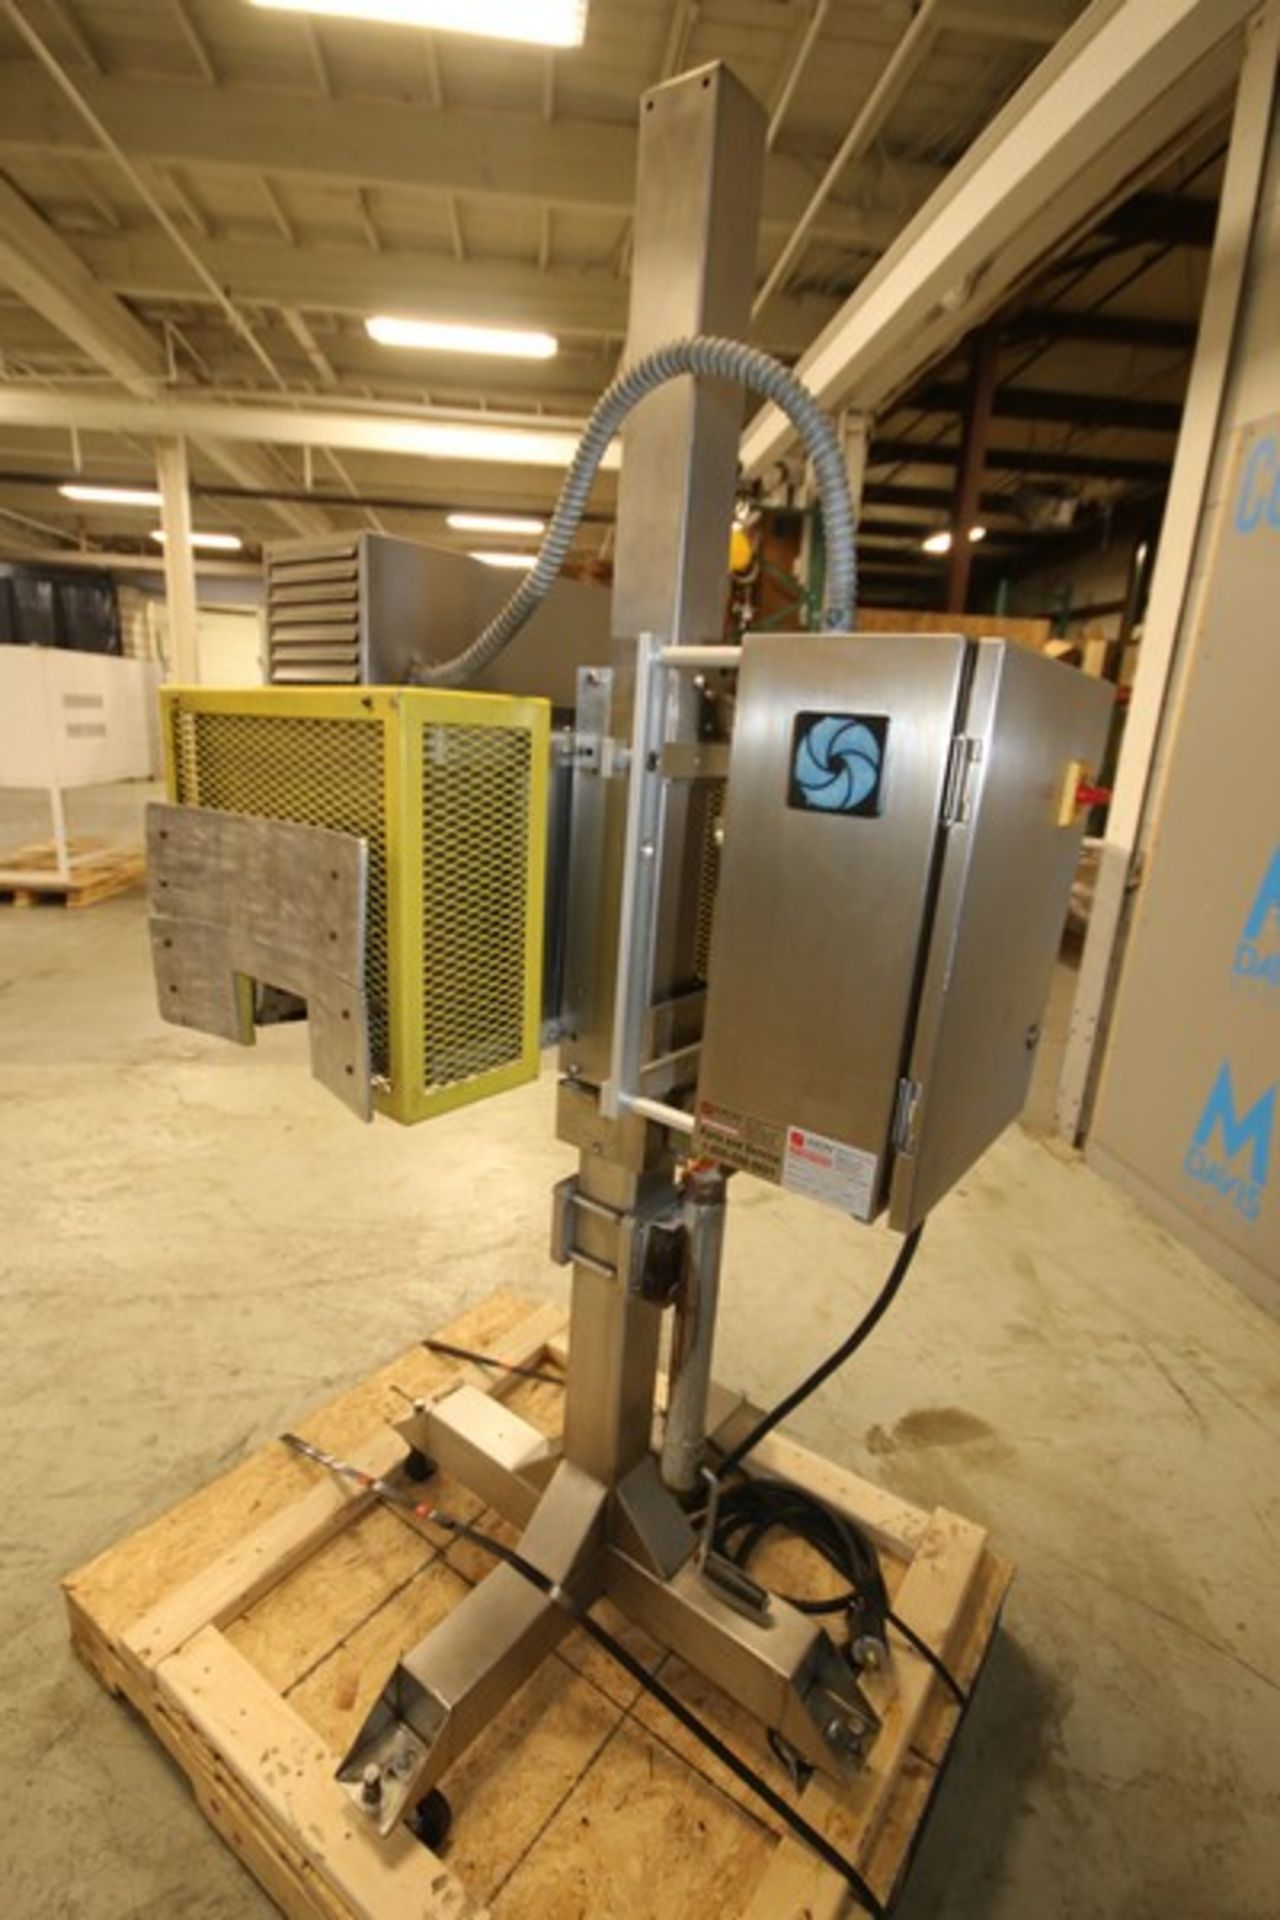 Axon Electric S/S Shrink Sleeve Heat Tunnel, Model E7 24 SRB2, SN E-051139, with 7" W x 7" H - Image 6 of 11